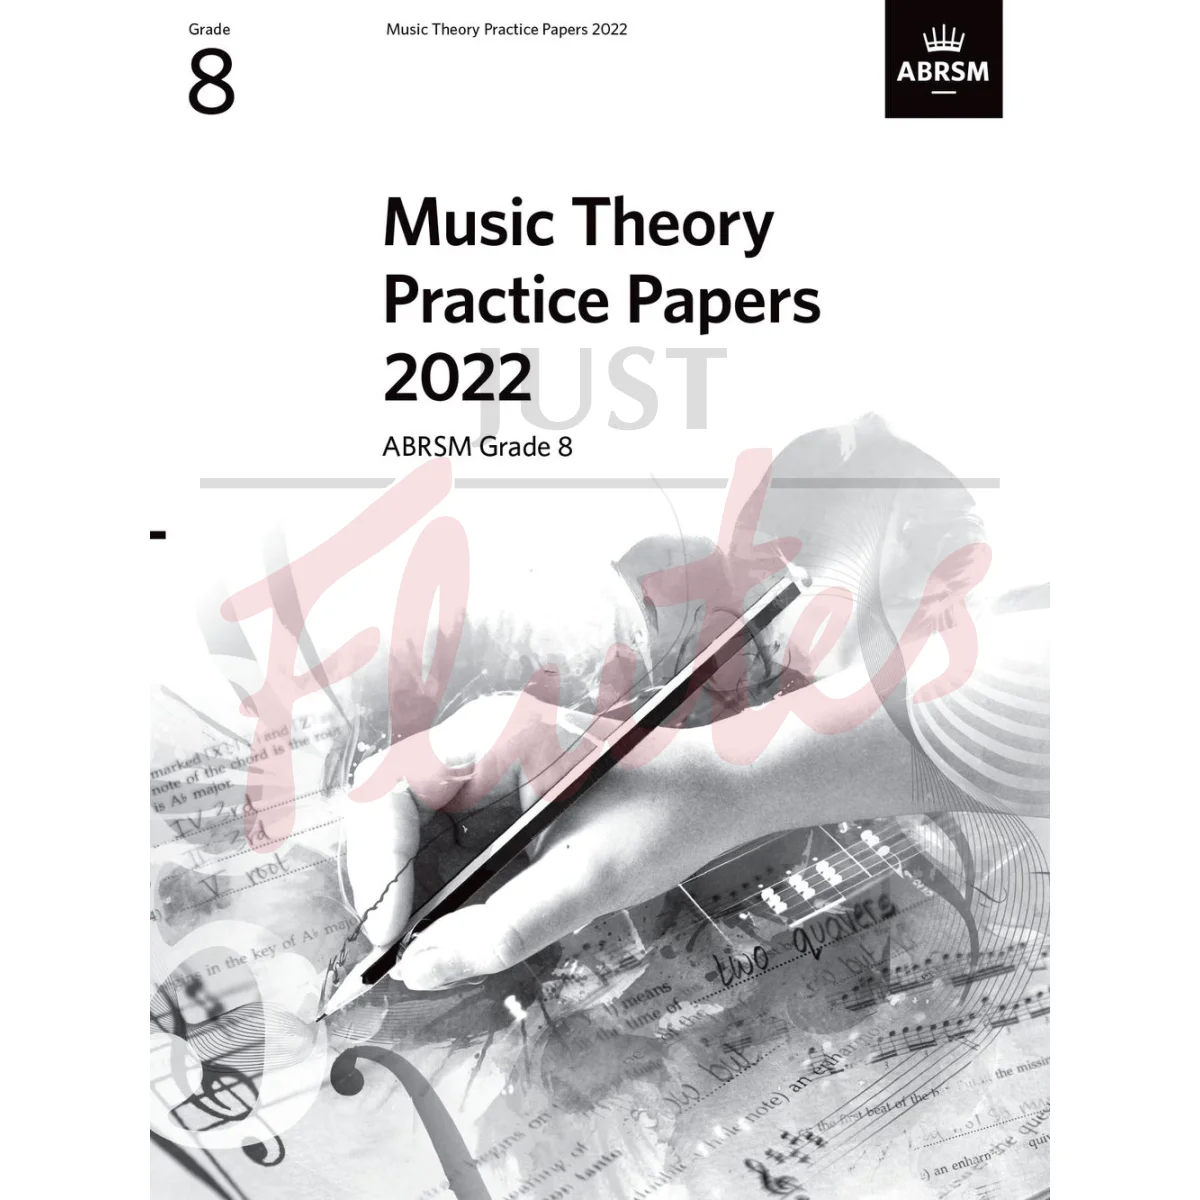 Music Theory Practice Papers 2022 Grade 8